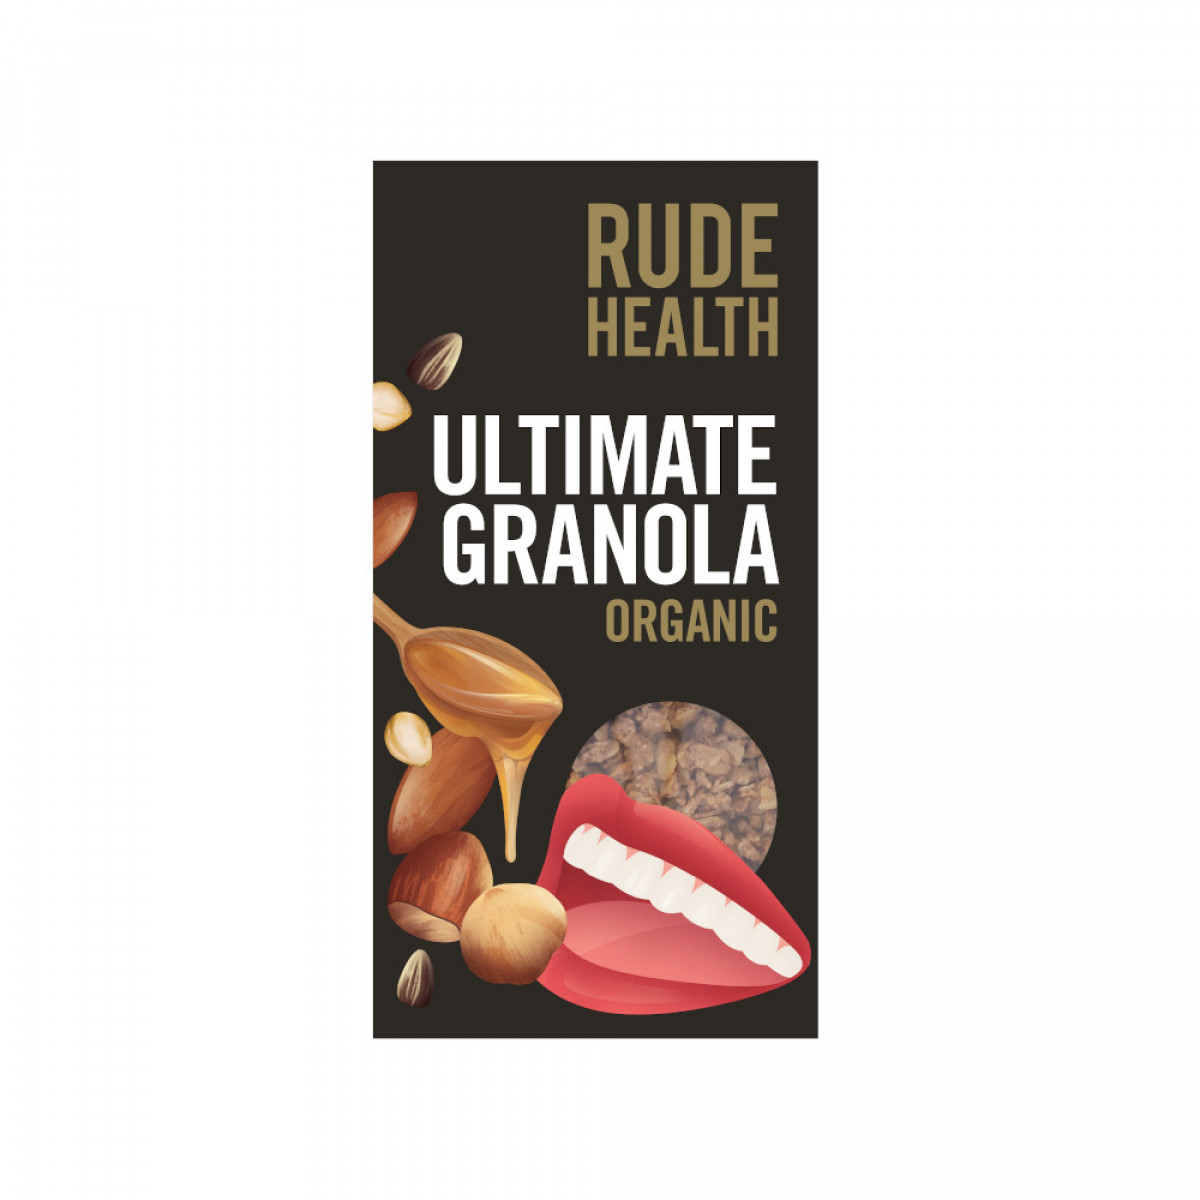 Product picture for The Ultimate Granola